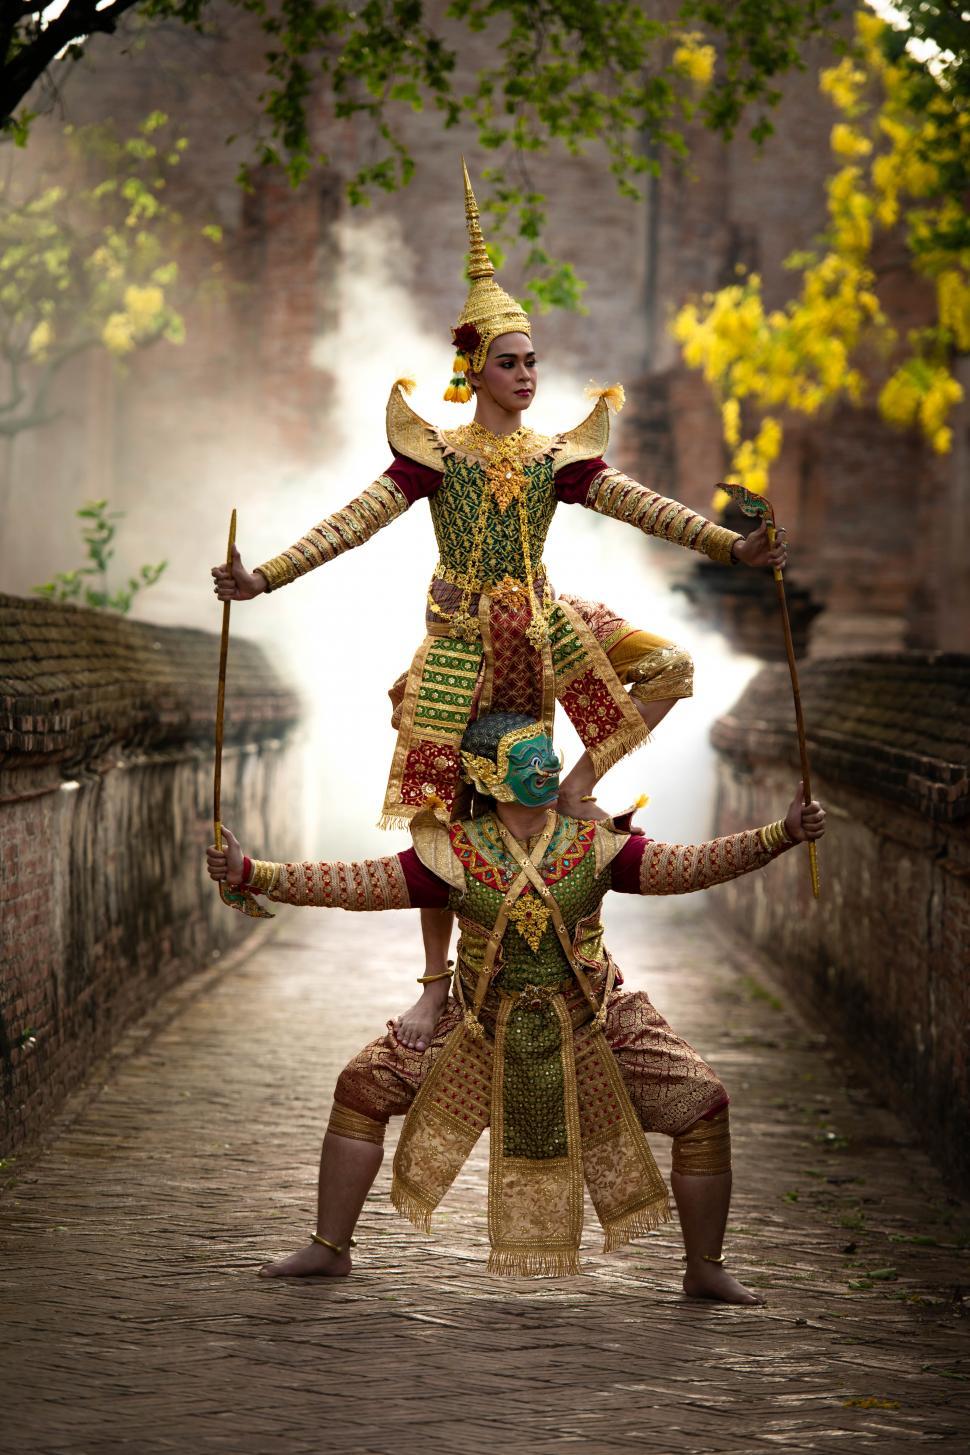 Free Image of Khon, Thai dance in a mask. Battle between the rama and giant. 